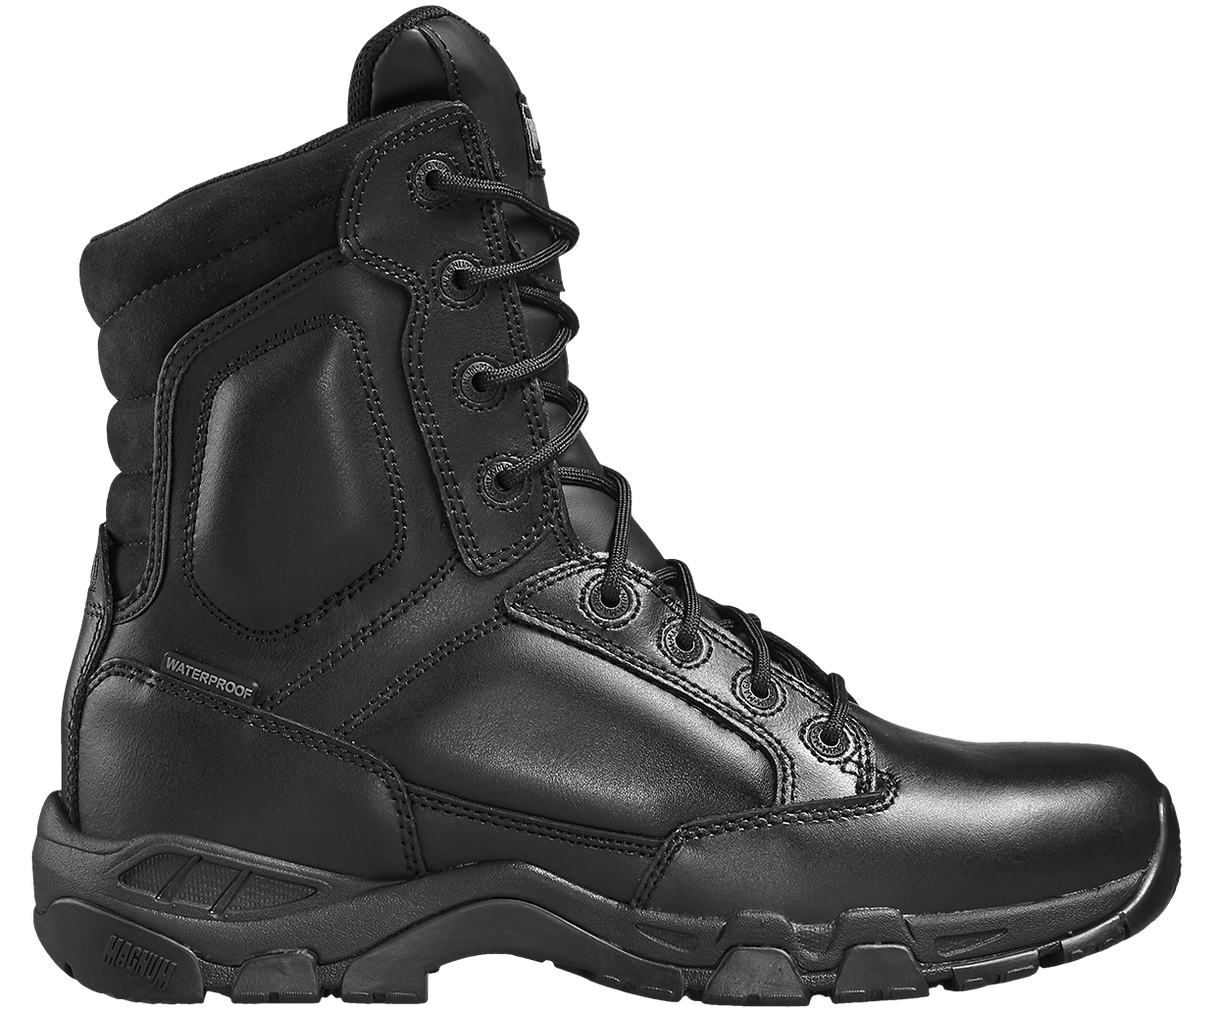 Magnum Viper Pro 8.0 Leather Waterproof Boots